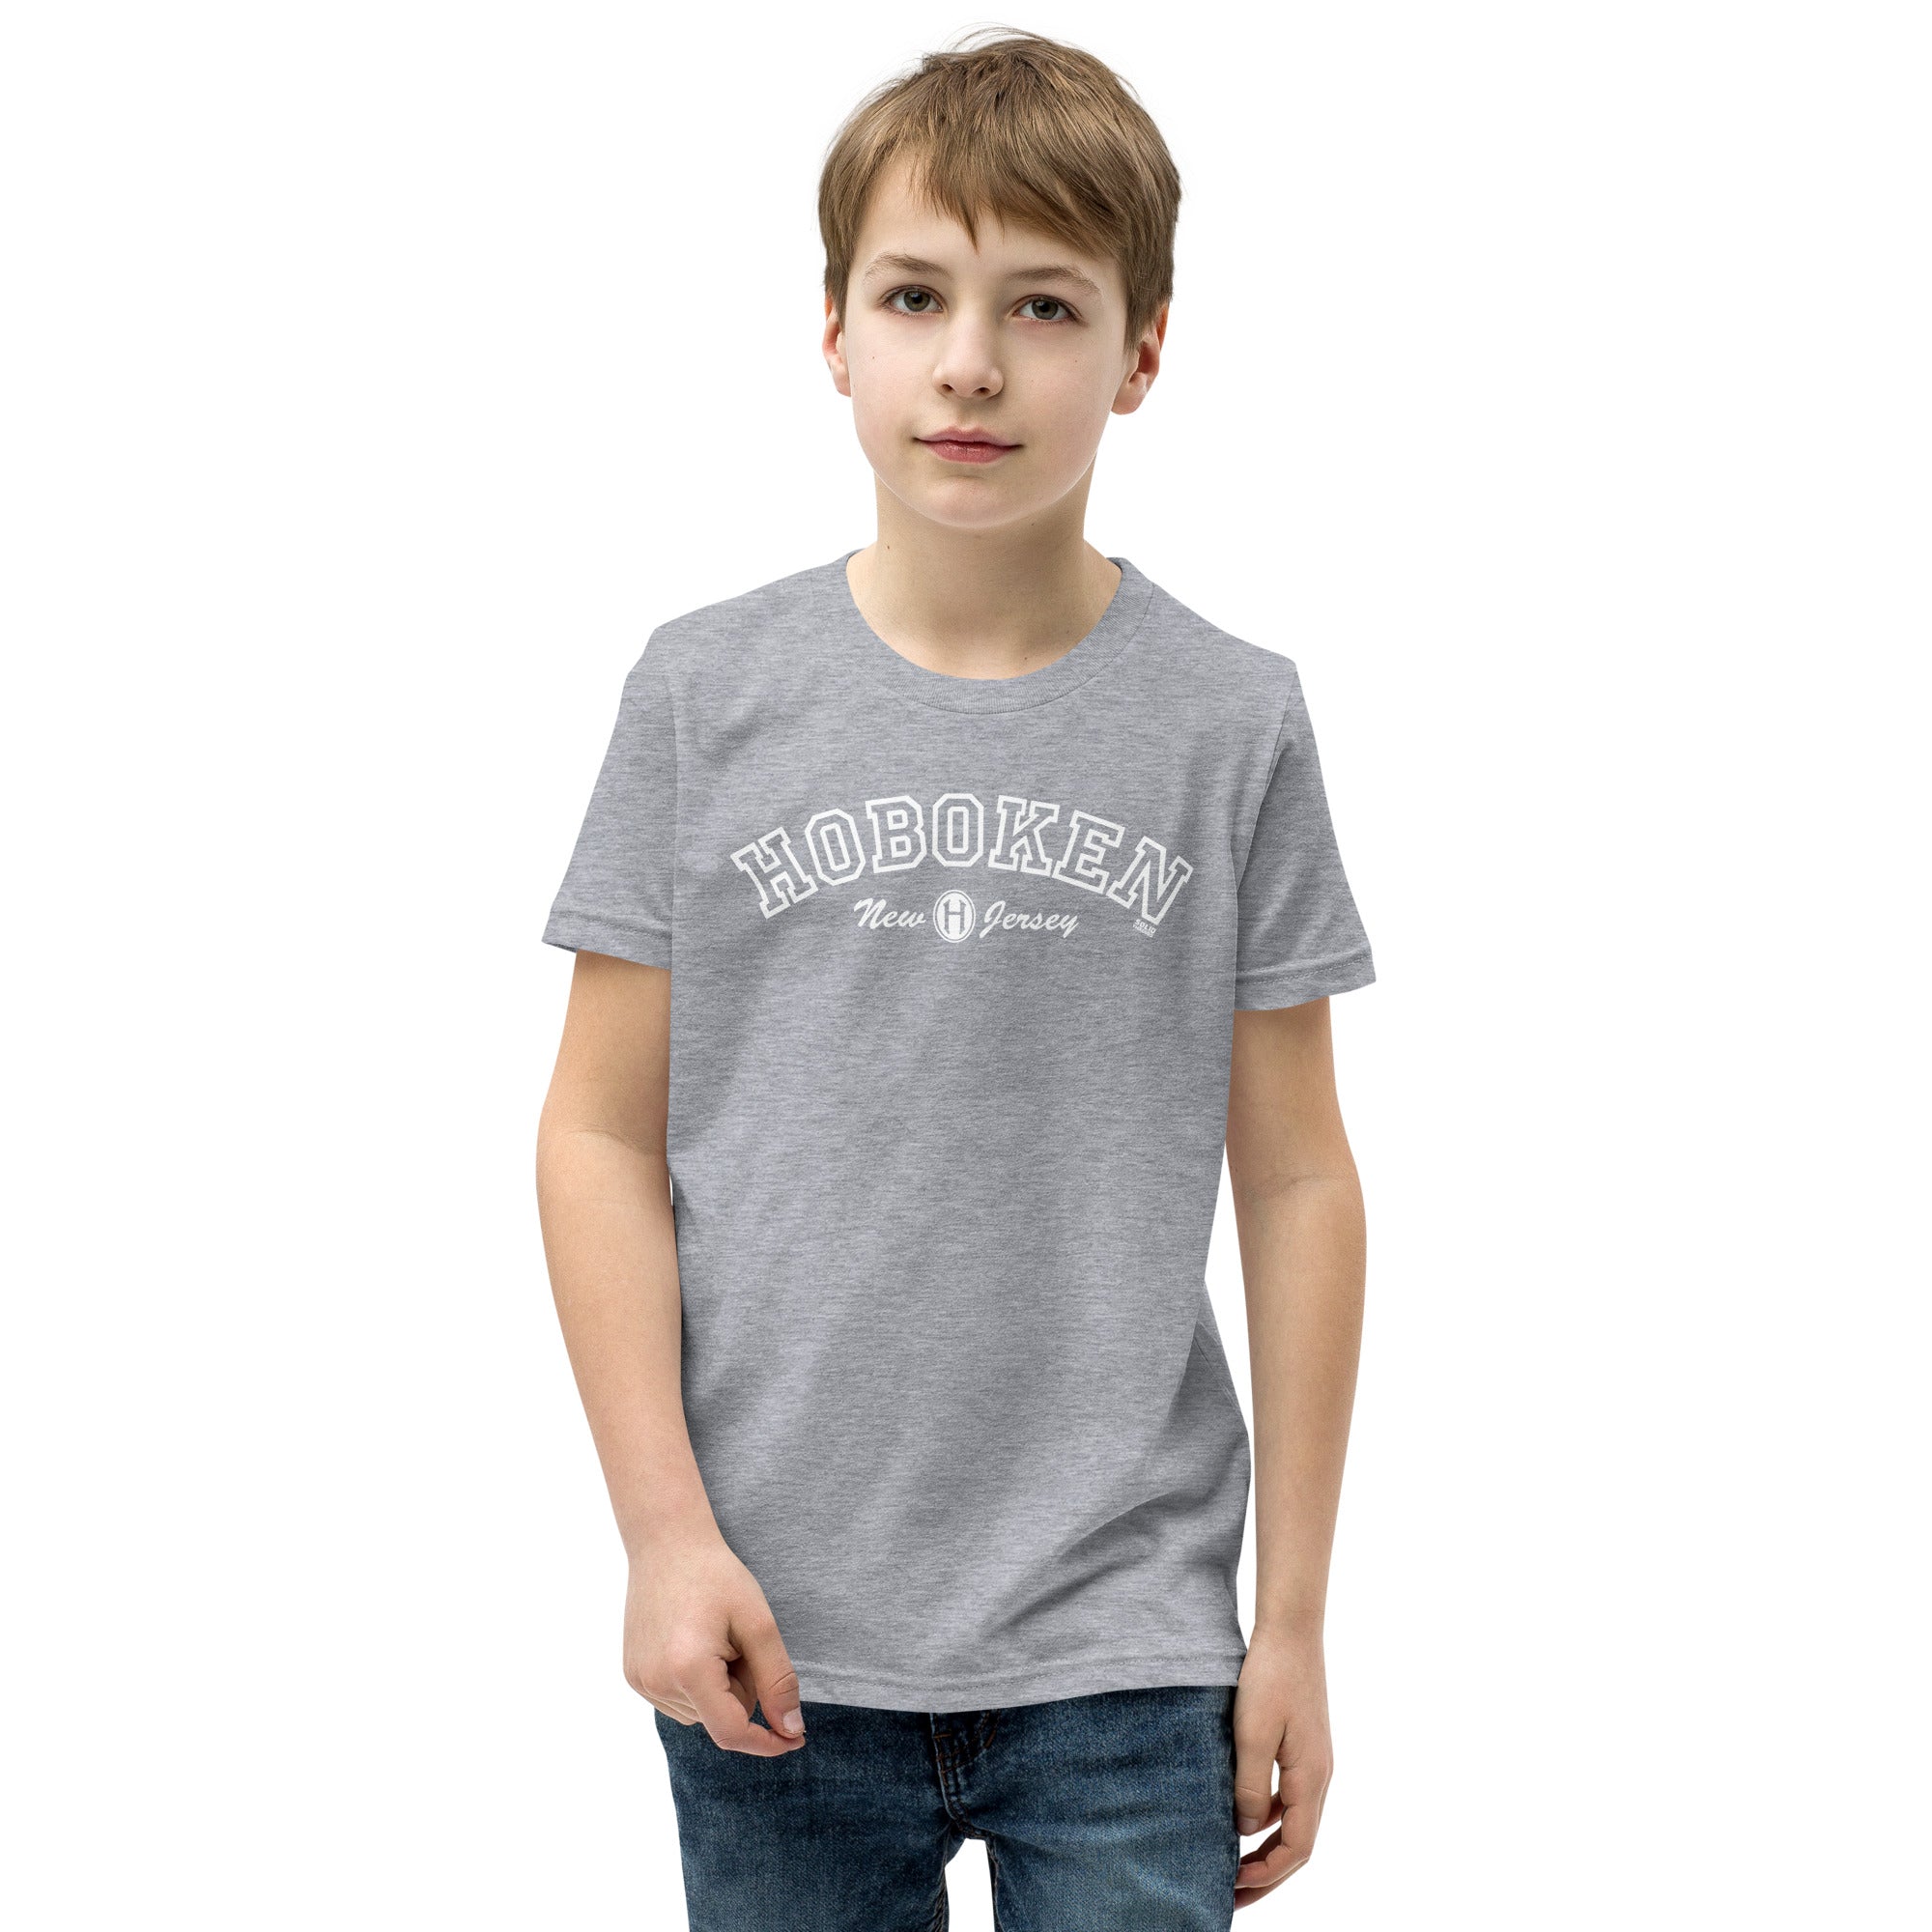 Youth Hoboken Collegiate Cool Extra Soft T-Shirt | Cute New Jersey Kids Tee Boy Model | Solid Threads